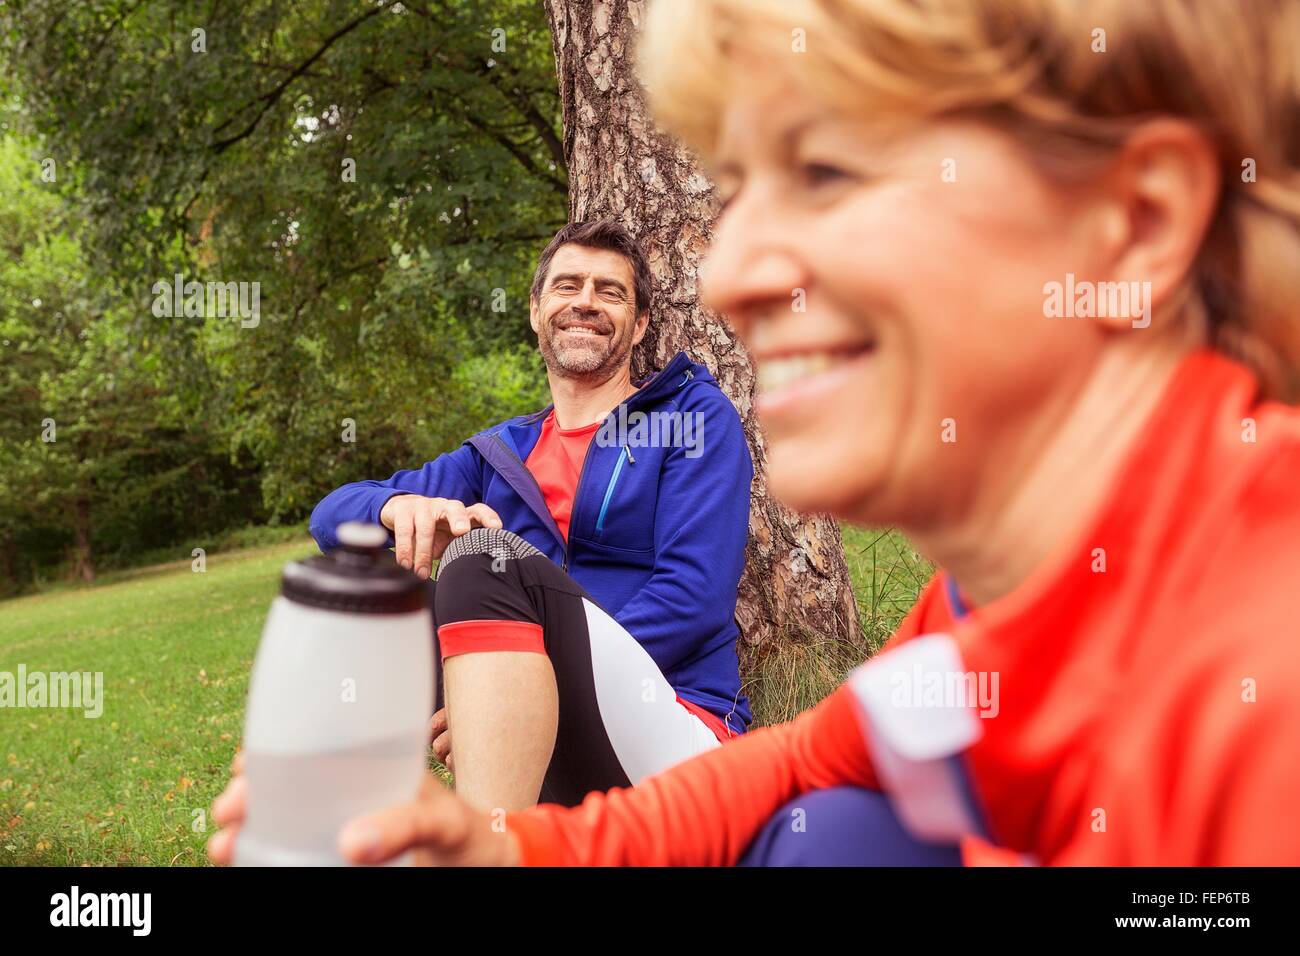 Couple relaxing, following exercise, holding water bottle Stock Photo